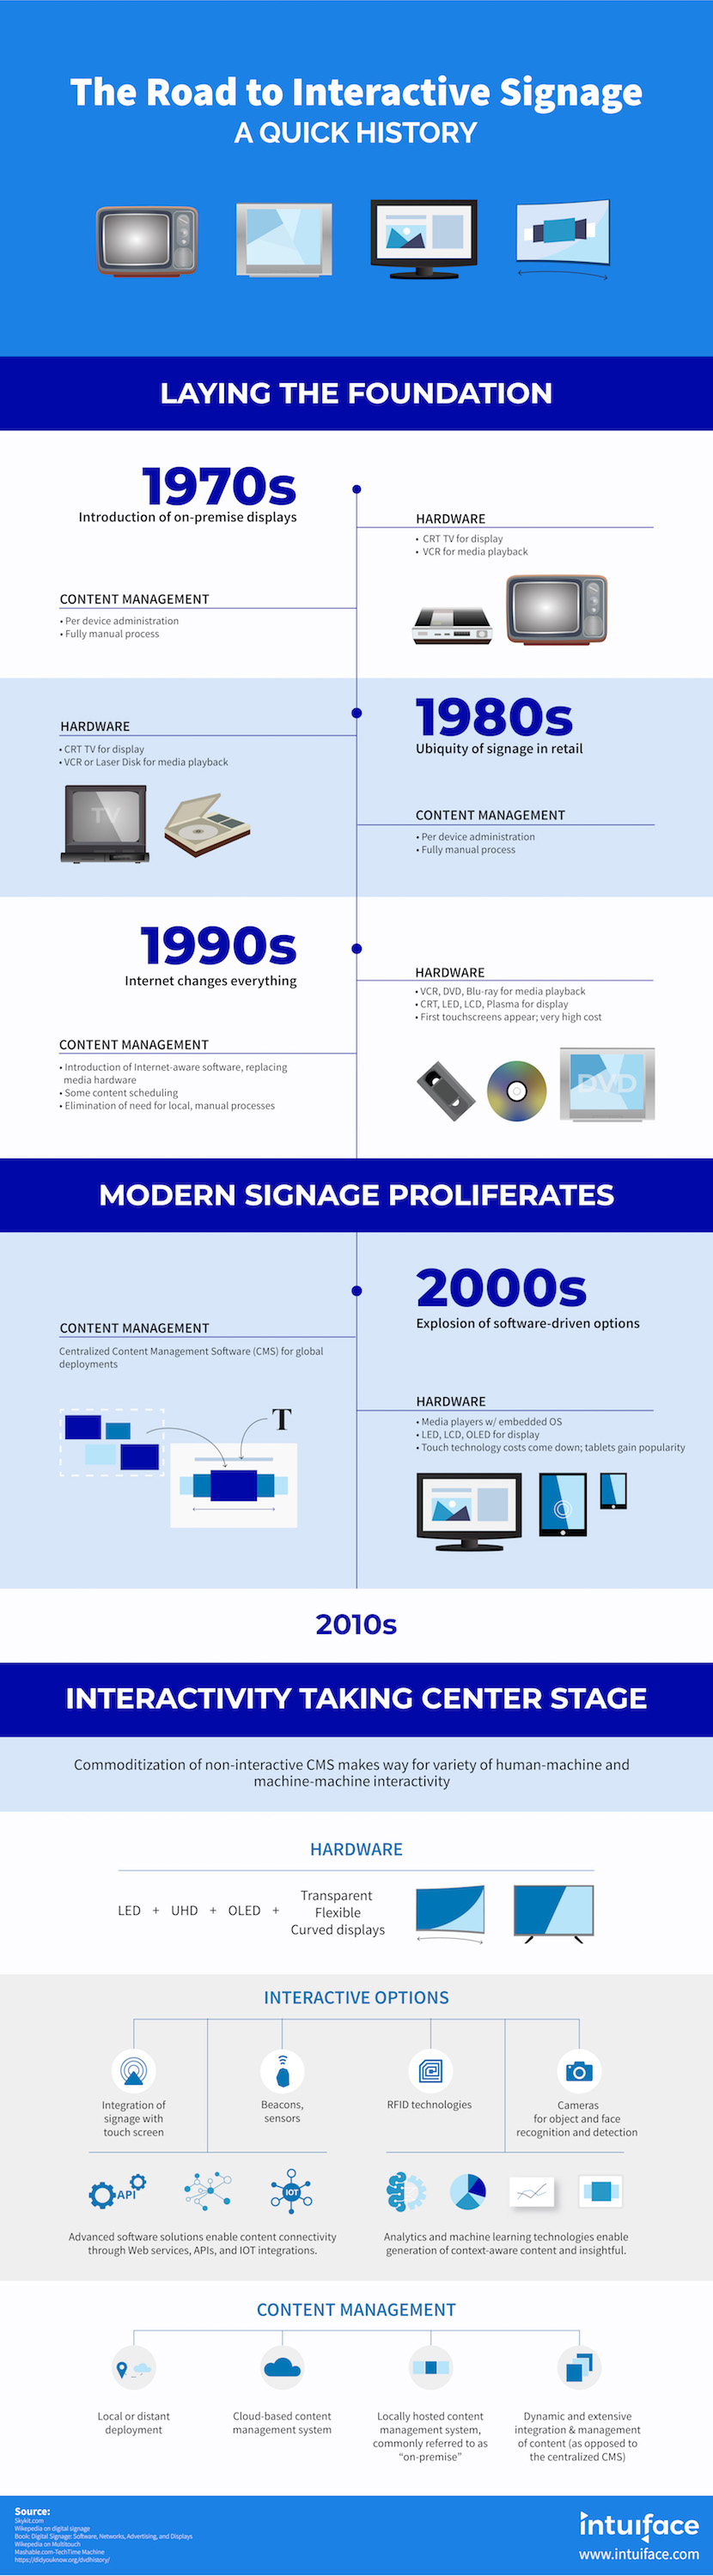 The Road to Interactive Signage - A Quick History